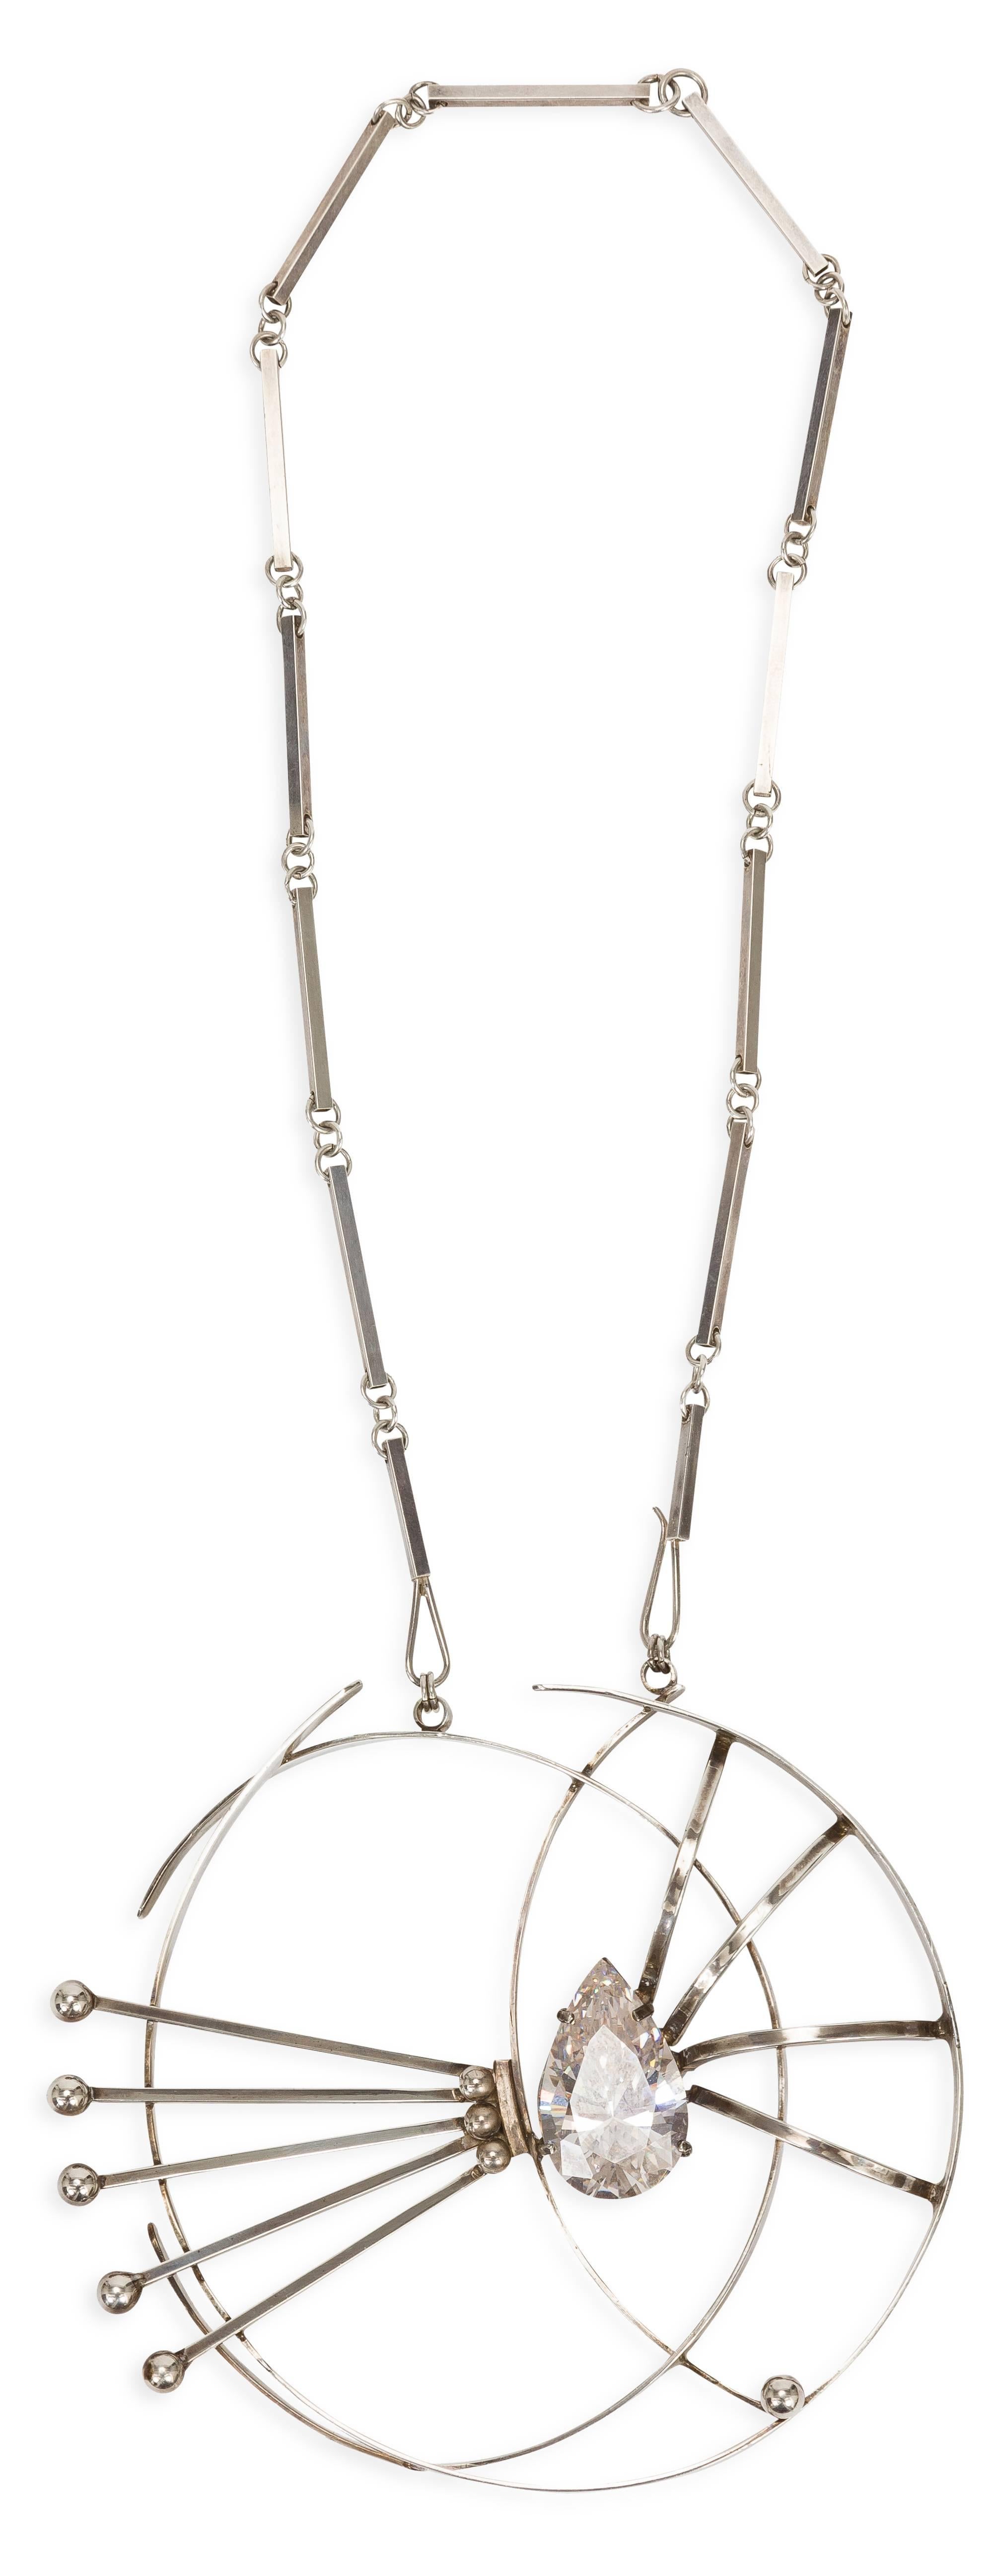 Aaron Rubenstein mid-century custom necklace with flat bar link chain and large  pendant with center abstract design and center tear drop crystal. Signed Aaron Rubenstein / Sterling.
MEASUREMENTS:
Chain drop -  14